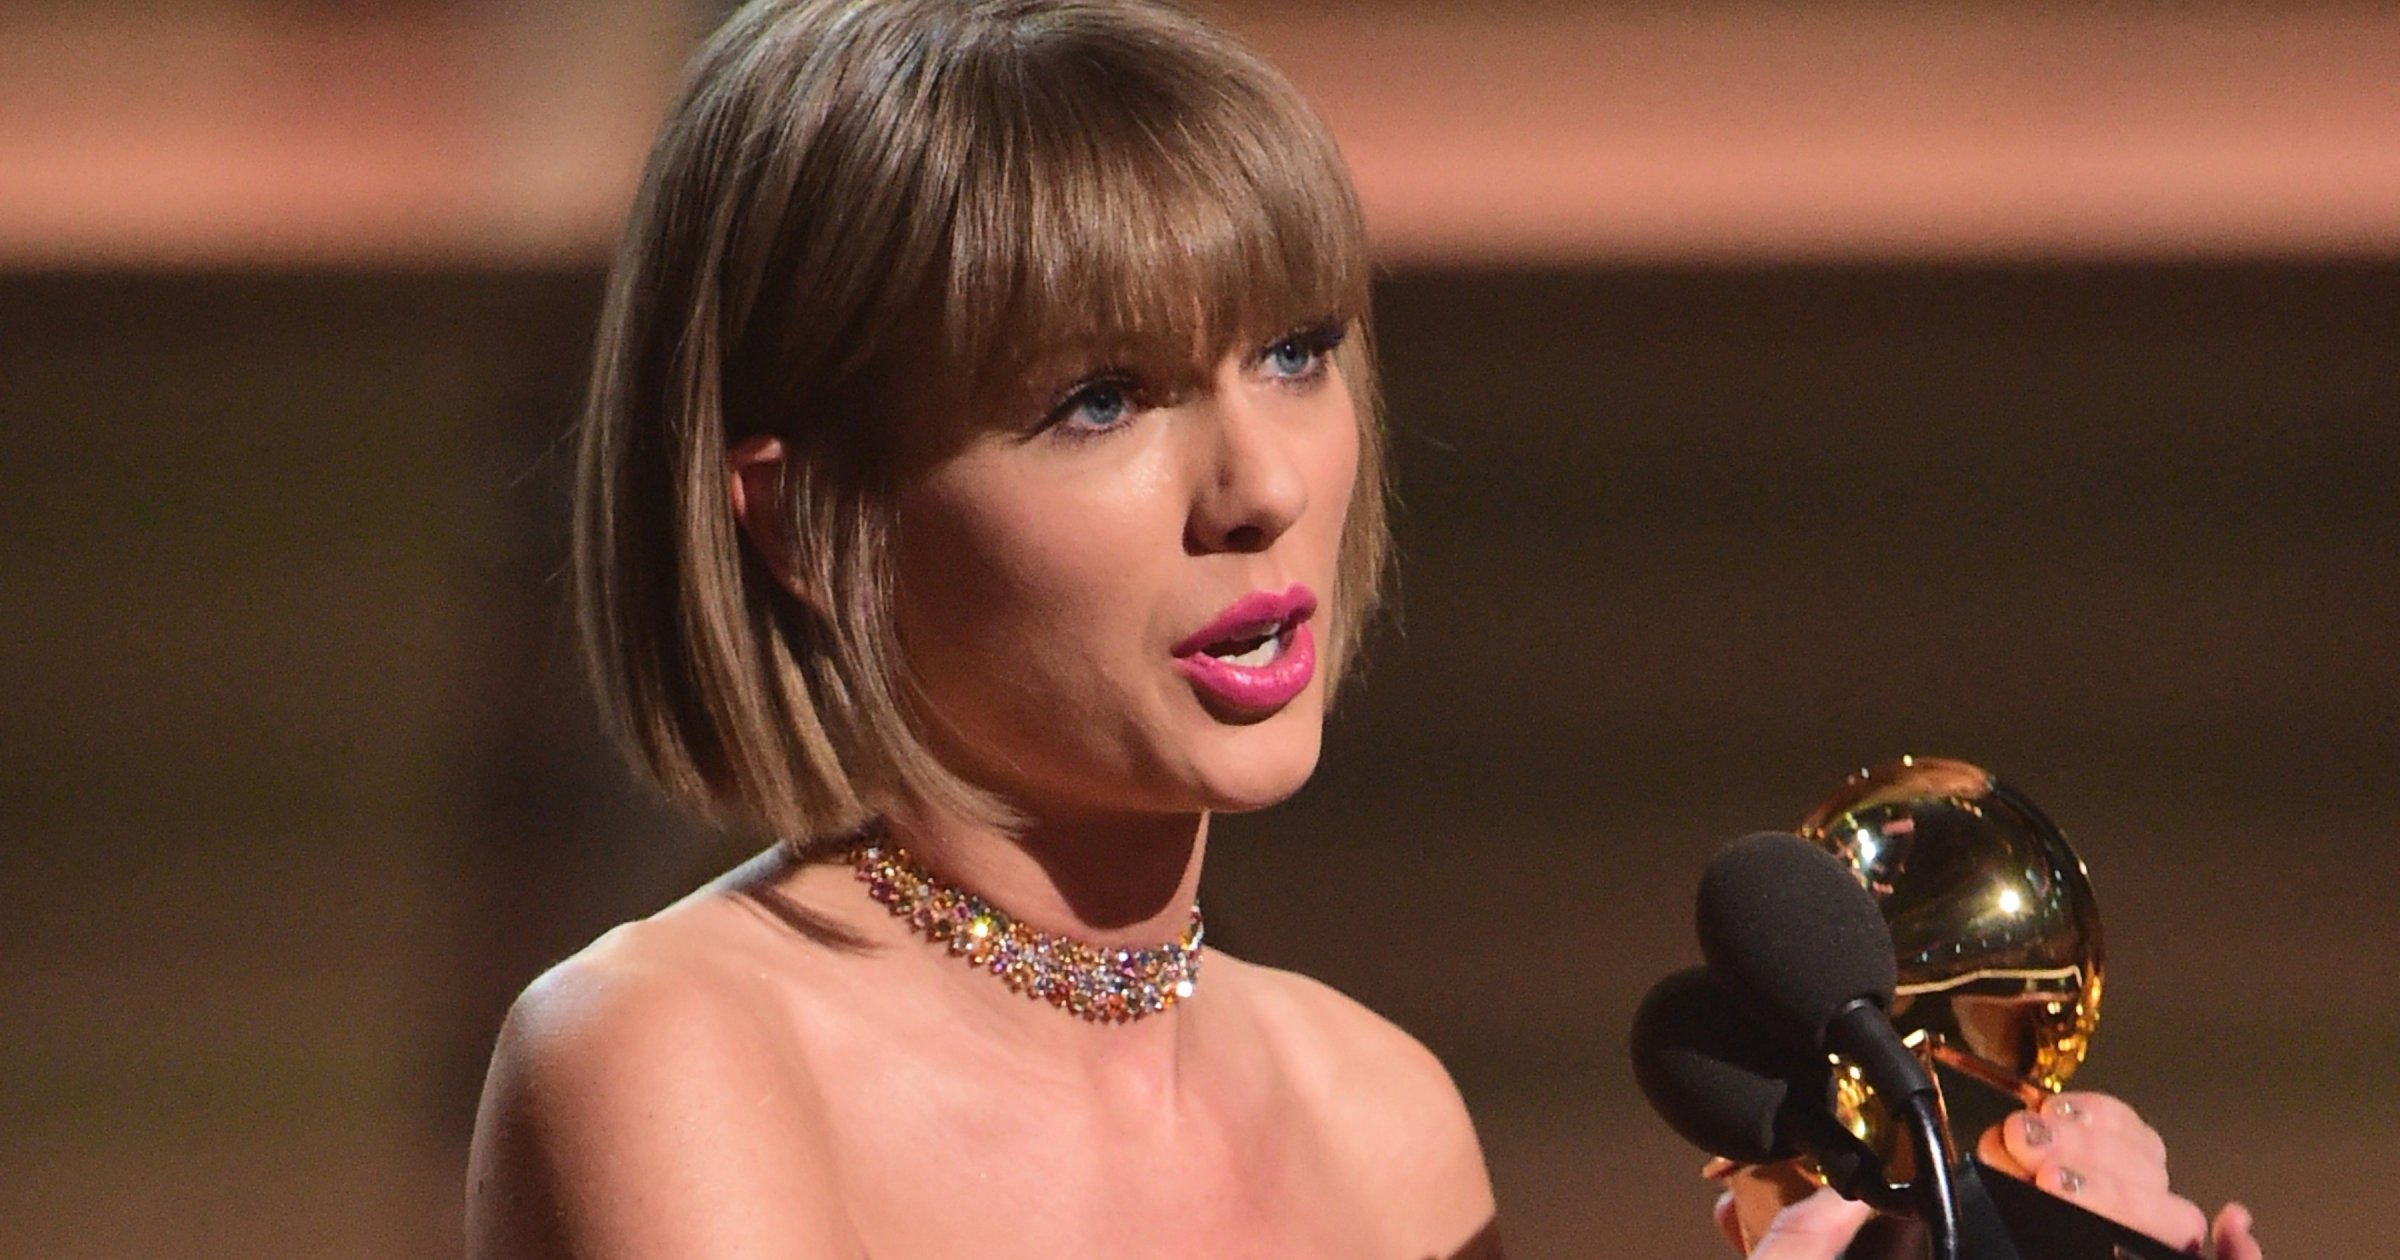 Taylor Swift accepts the award for "Album of the Year" during the 58th Annual Grammy Awards on Feb. 15, 2016 in Los Angeles.